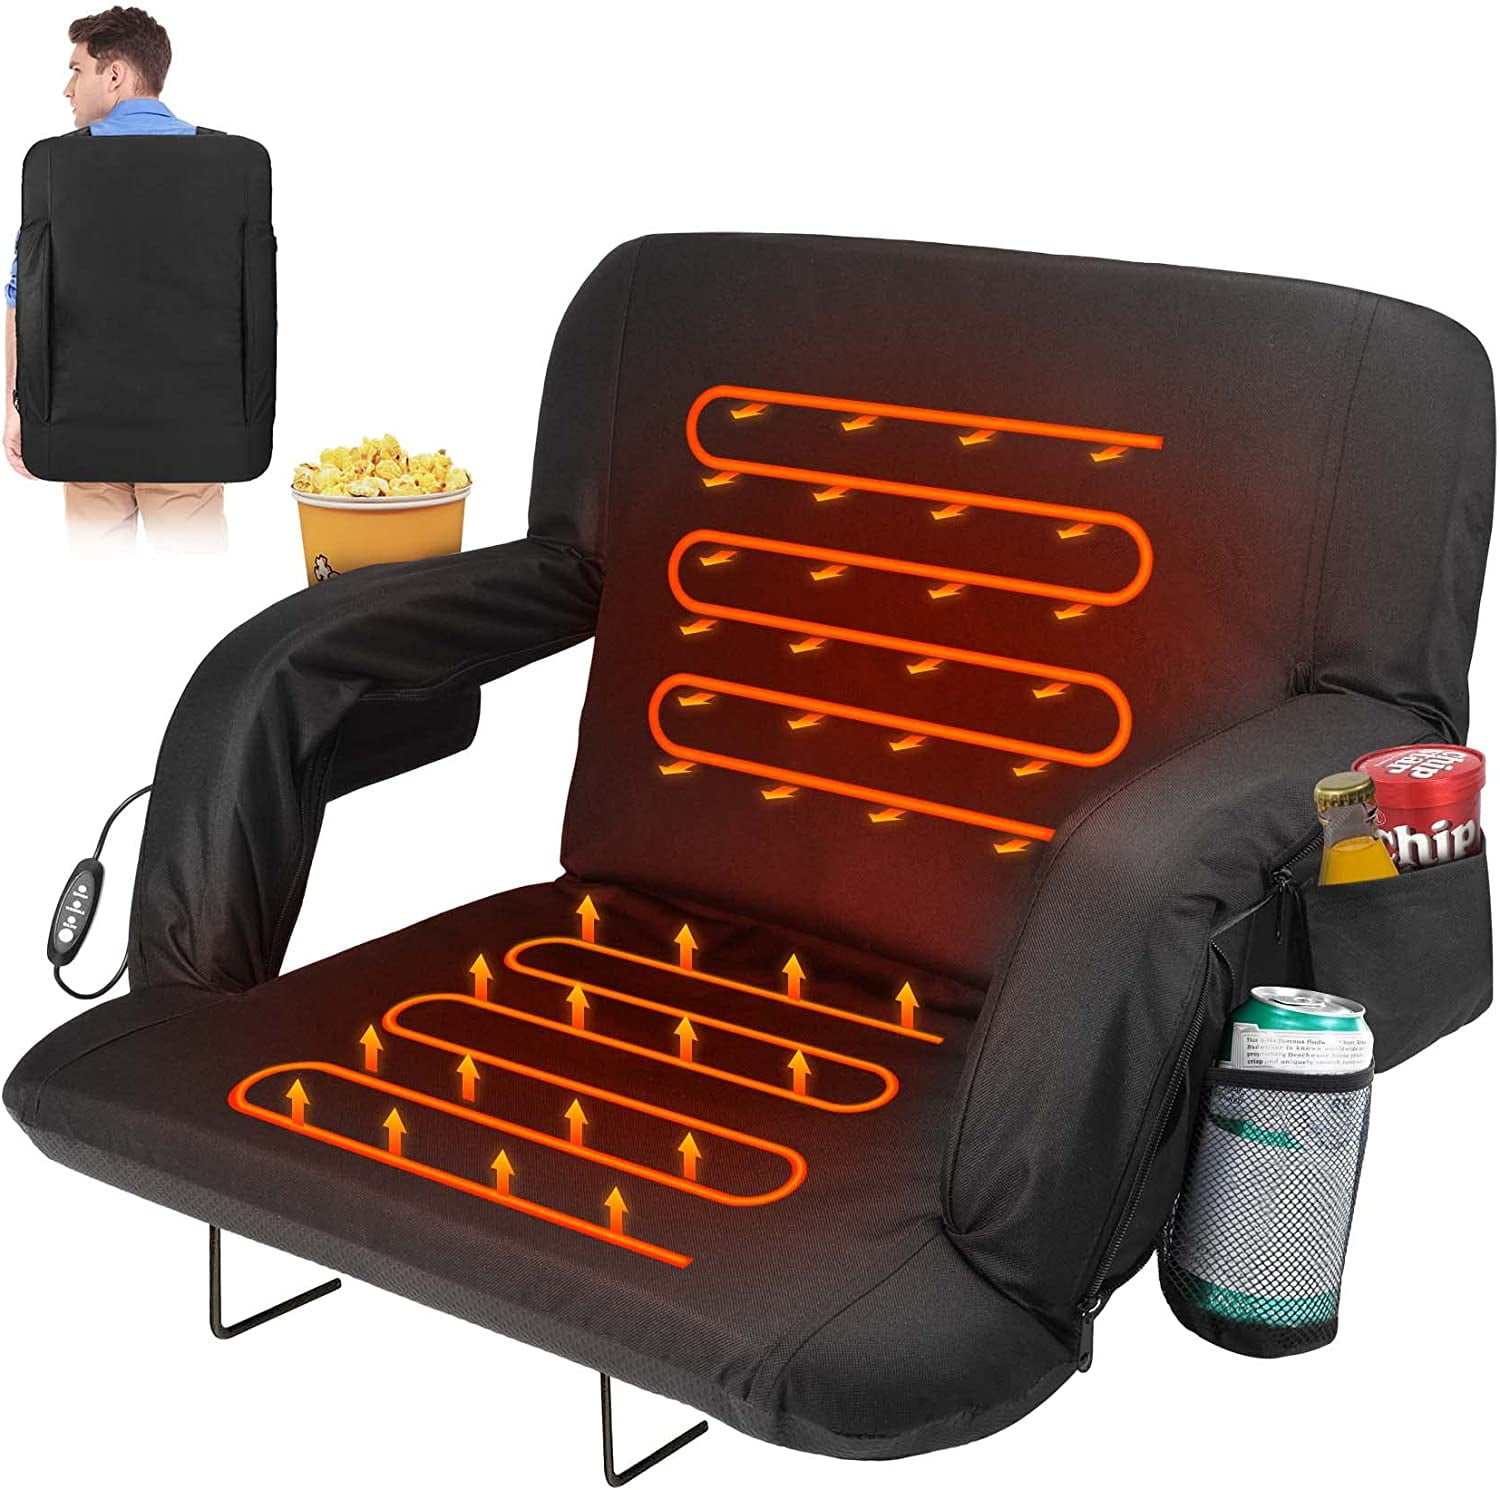 SOJOY Heated Stadium Seats for Bleacher with Back Support, 25 Extra Wide  Folded Bleacher Chair USB Heat for Outdoor Camping (Battery is NOT  INCLUDED) - Online Shopping for Car Heated Blankets,Heated Seat